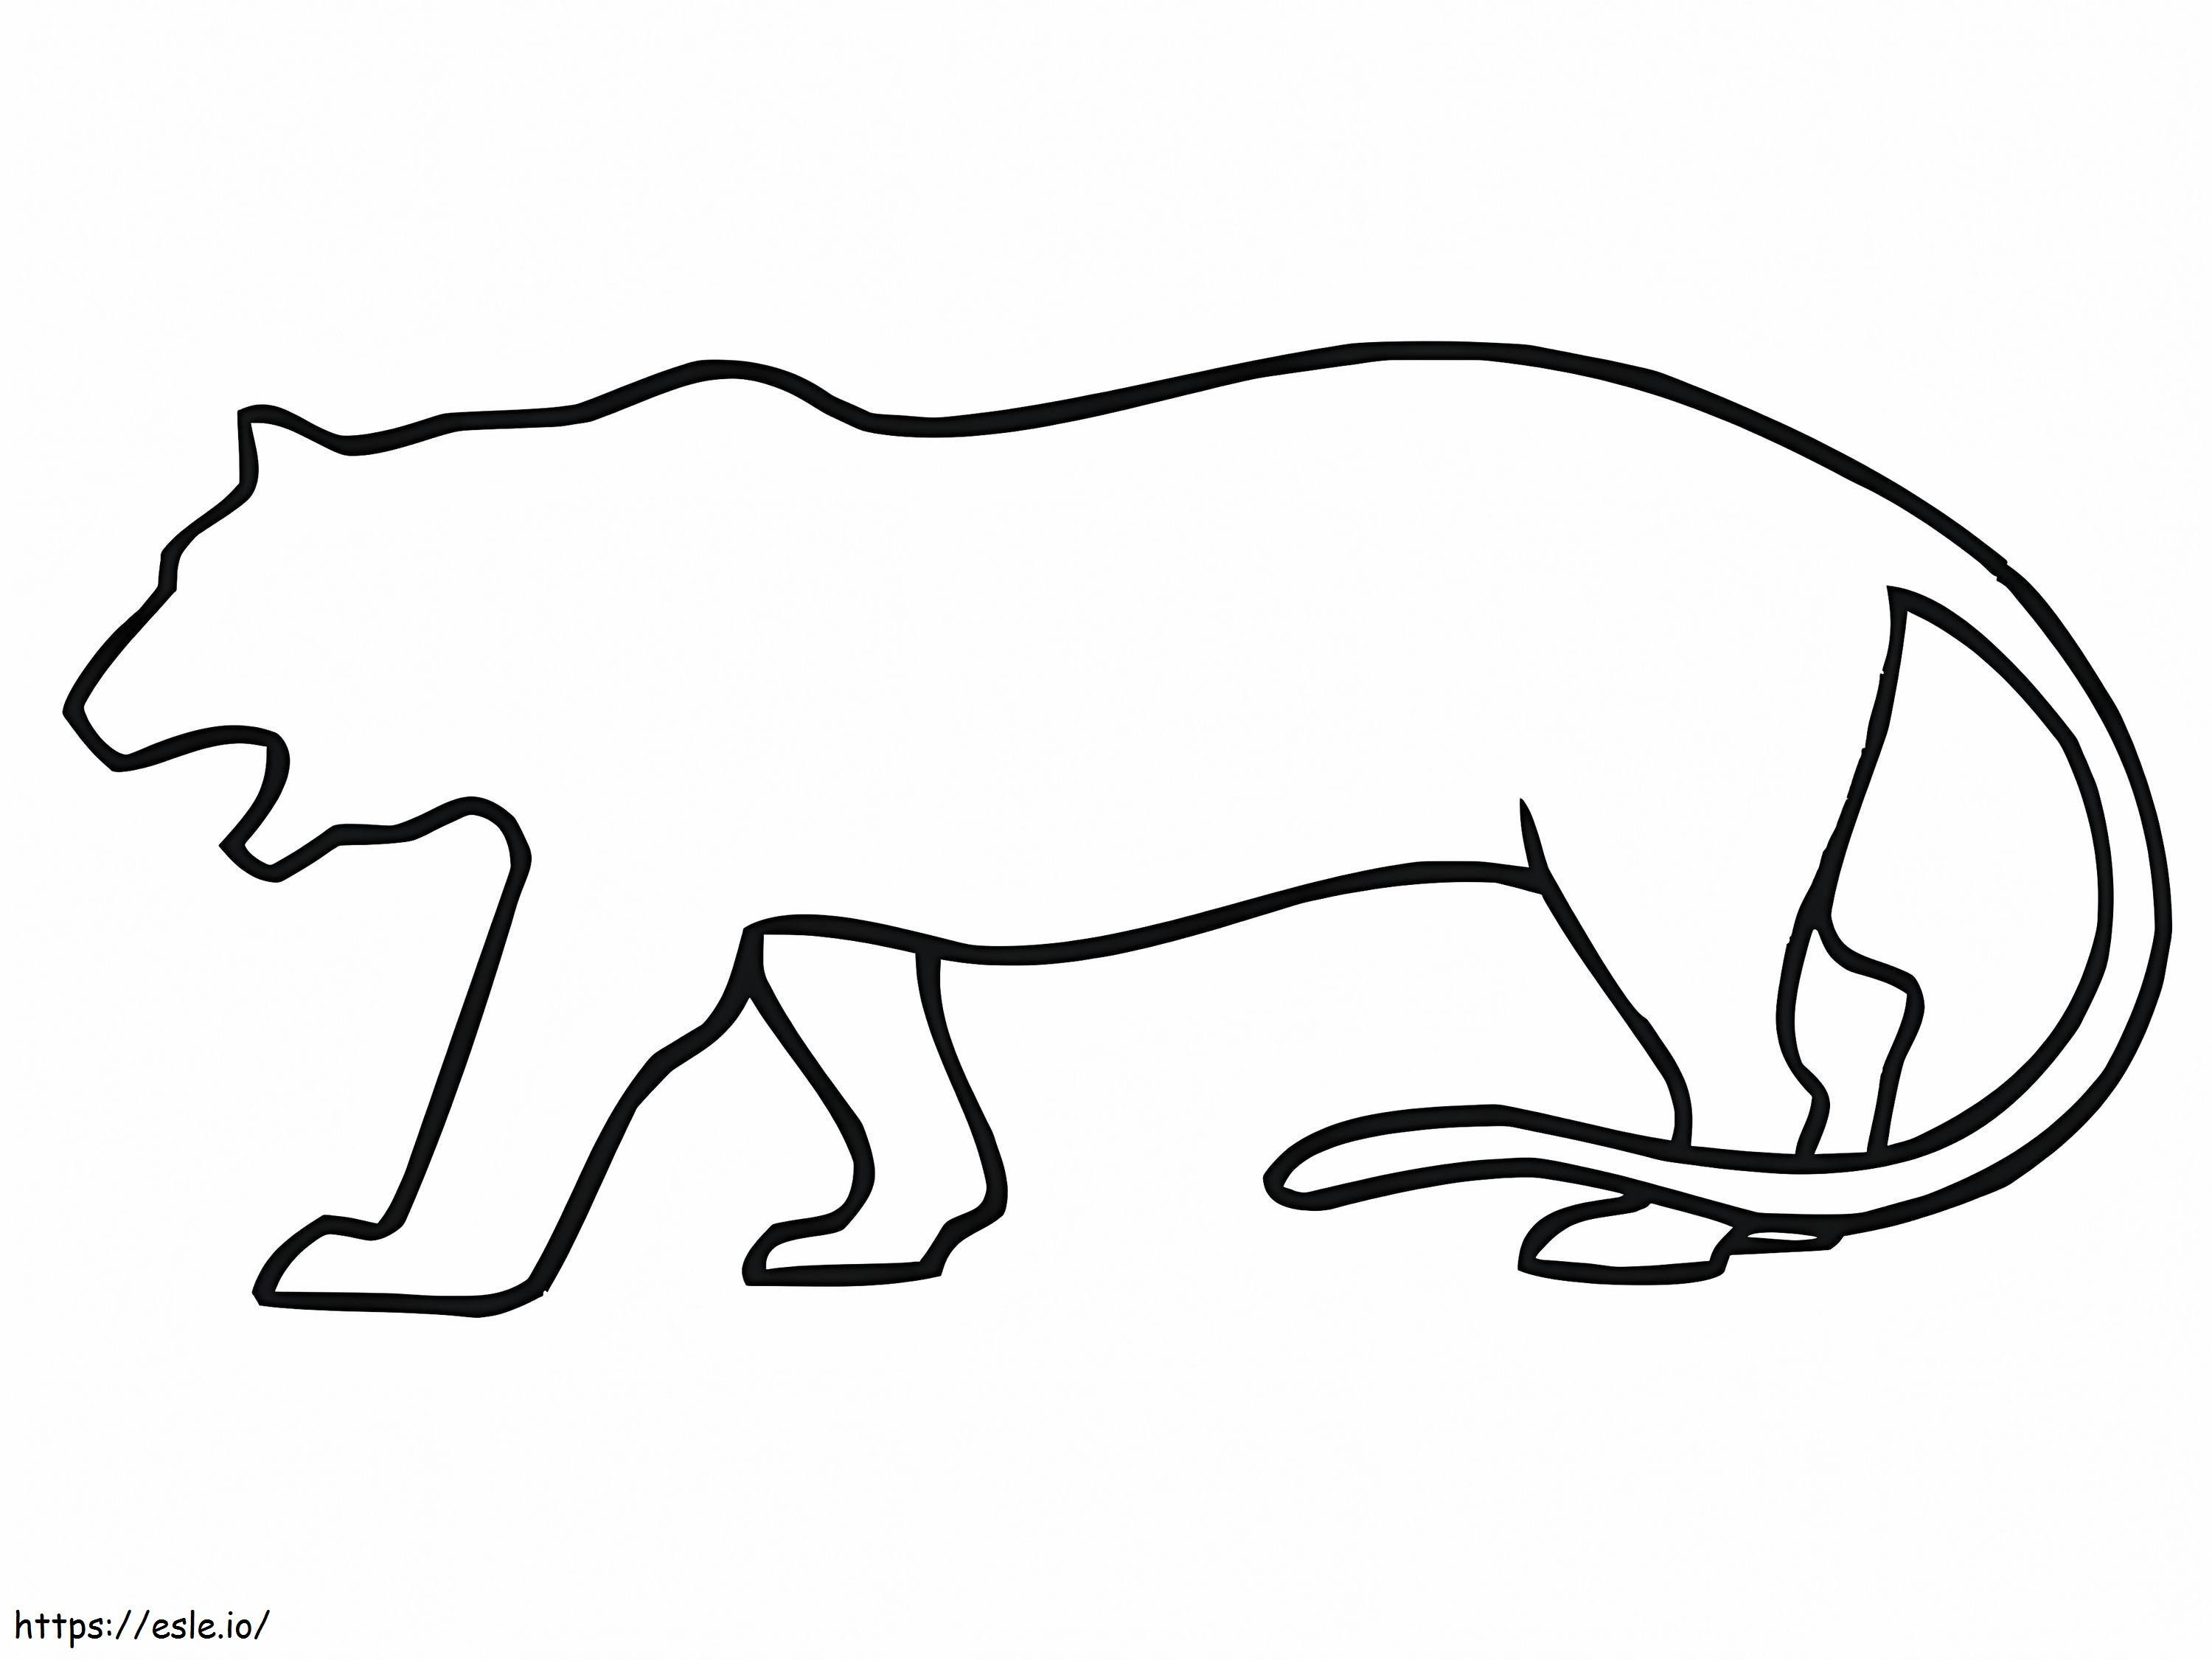 Tiger Outline coloring page